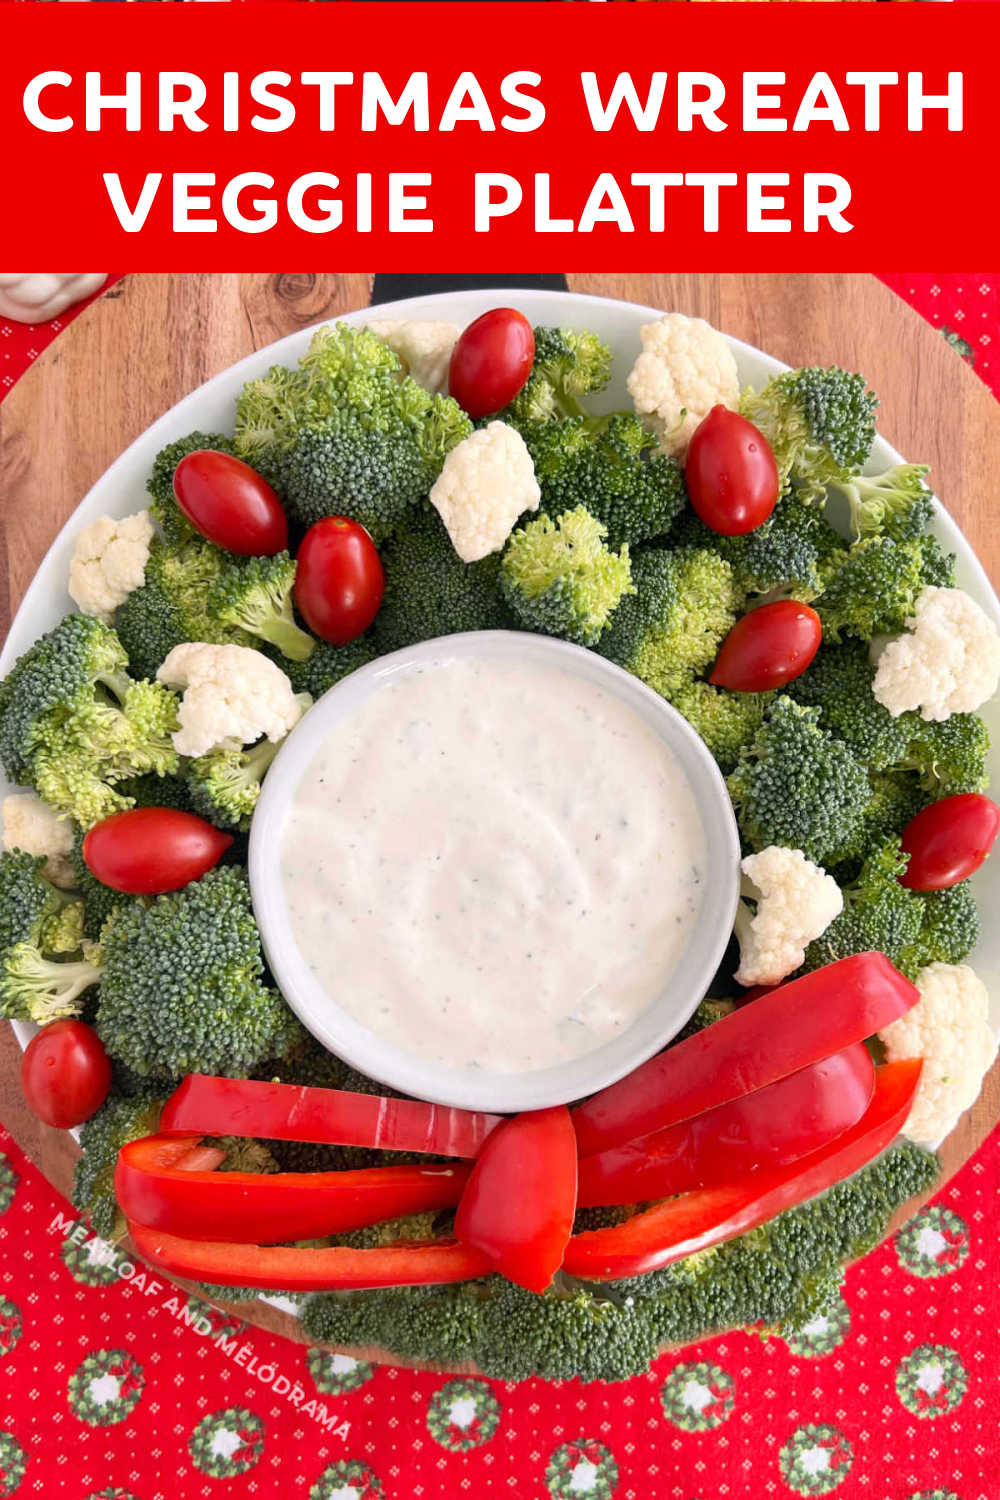 This Christmas Wreath Vegetable Platter is an easy appetizer made with broccoli and other raw vegetables in the shape of a holiday wreath. Your guests will love this festive veggie tray! via @meamel